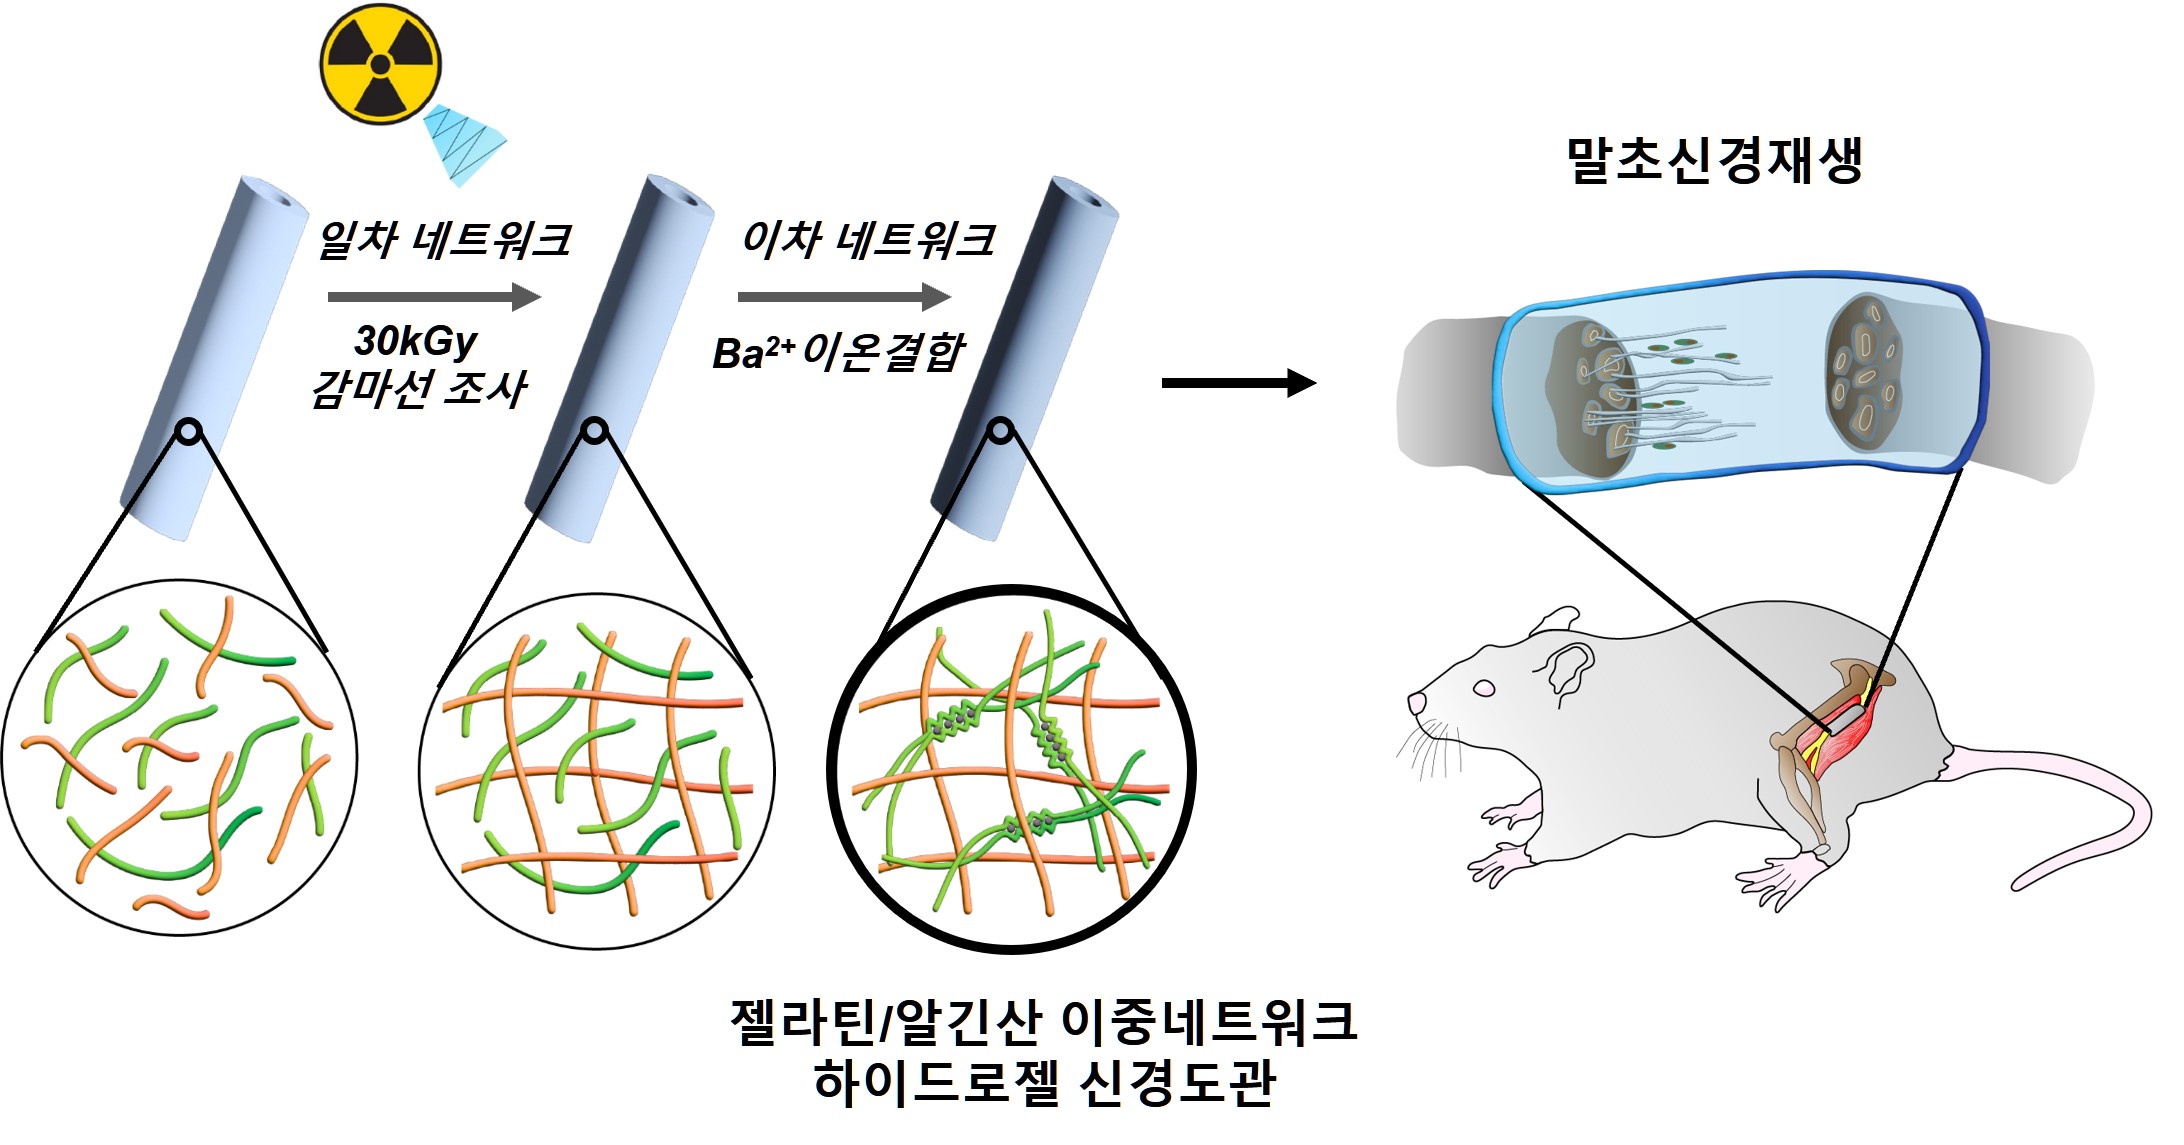 Professor Jae Young Lee’s new material research team developed a hydrogel nerve conduit that is sterile, non-toxic, has improved mechanical properties, and is easy to manufacture 이미지